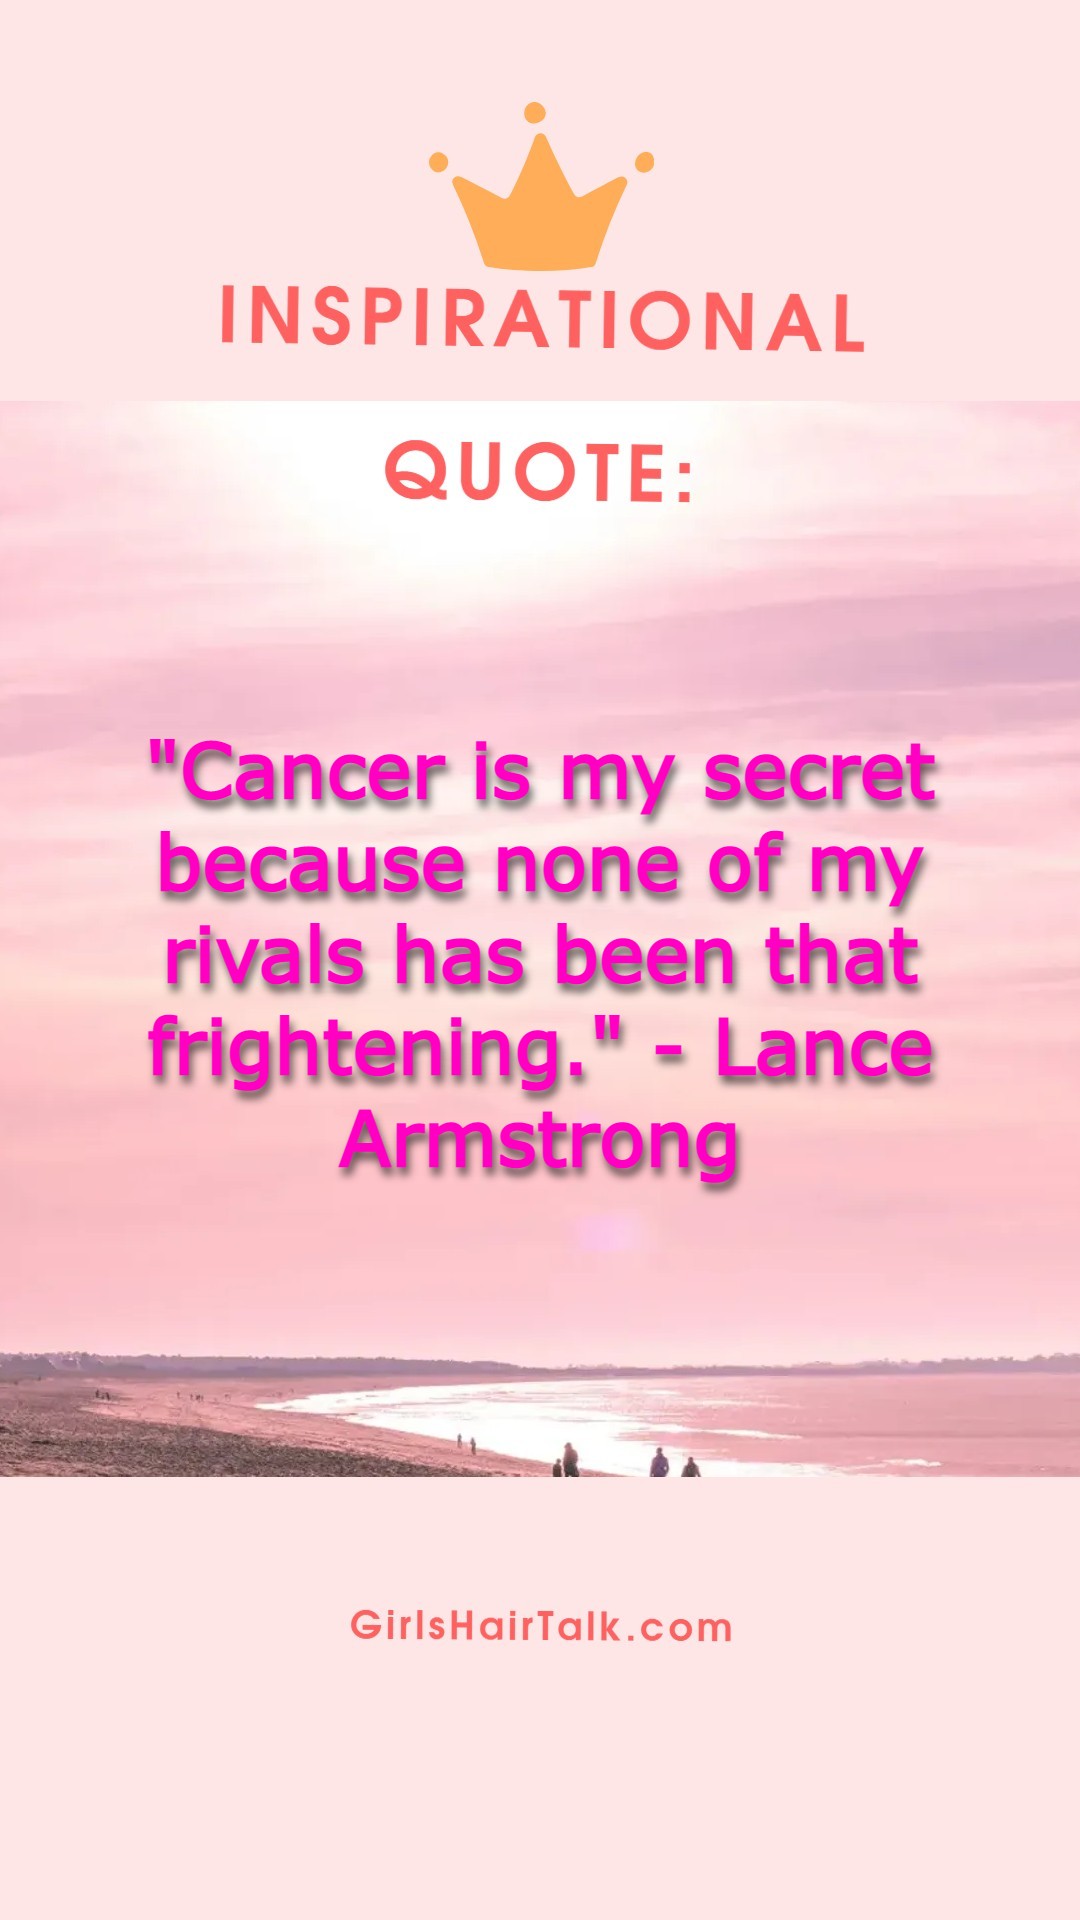 Lance Armstrong cancer quote